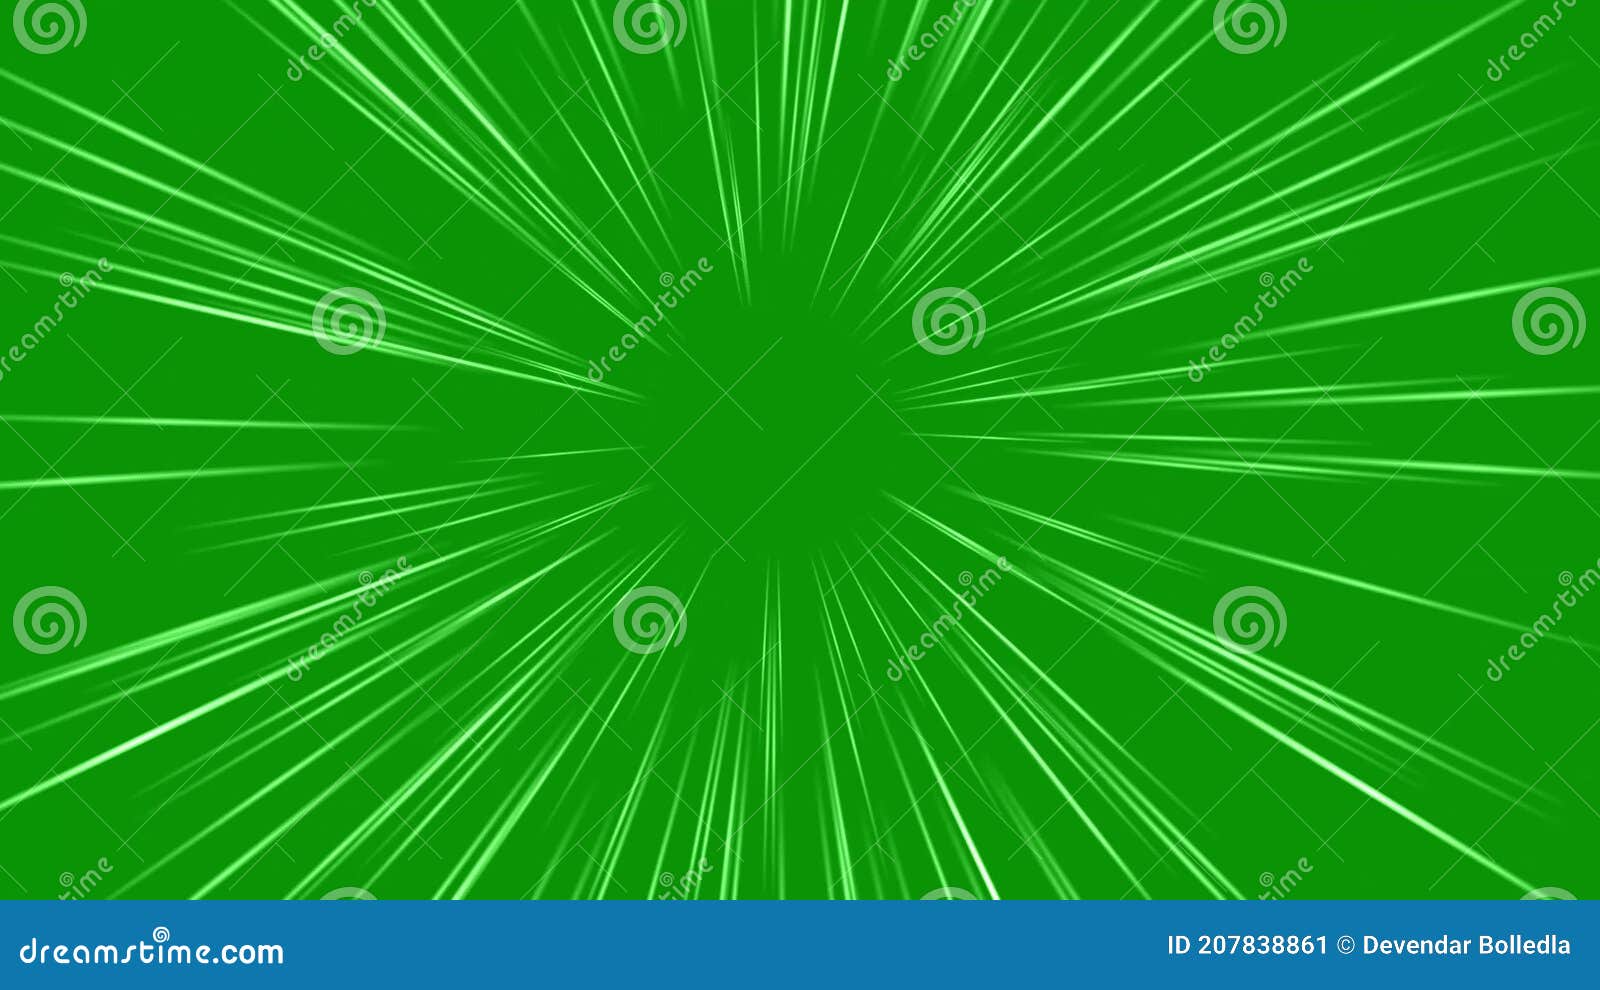 Speed Lines Motion Graphics With Green Screen Background Stock Video -  Video Of Tunnel, Rays: 207838861